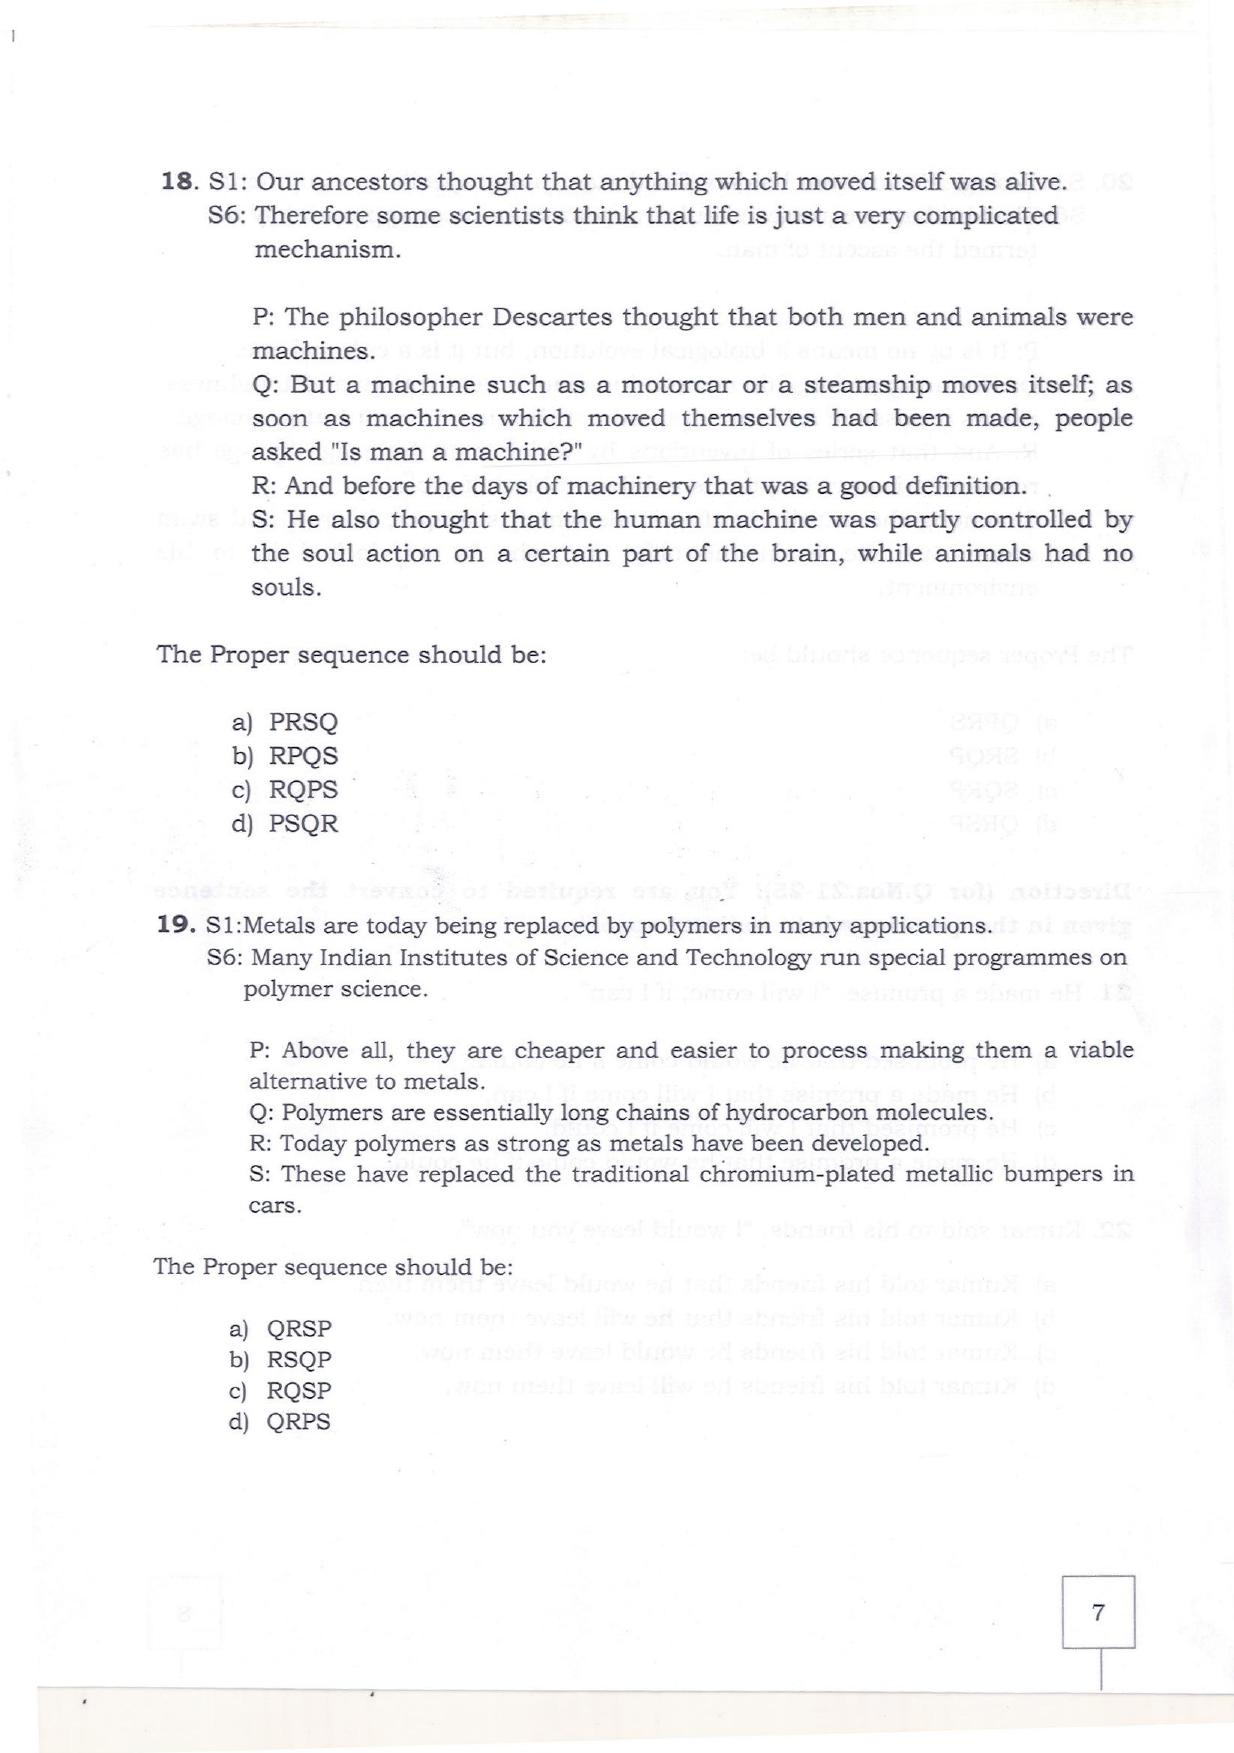 KMAT Question Papers - February 2019 - Page 5